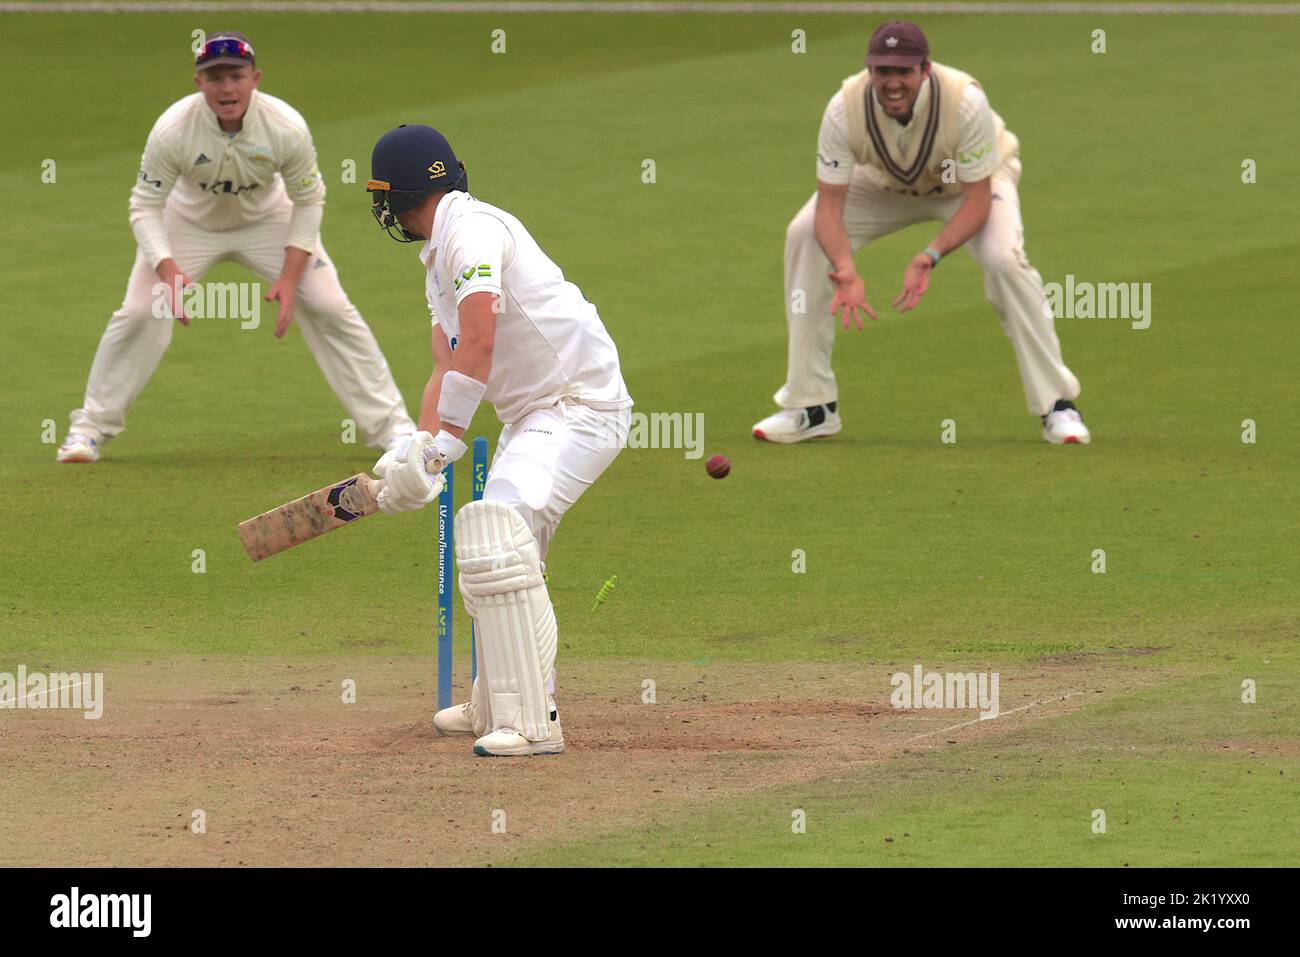 21 September, 2022. London, UK. Yorkshire’s Ben Coad bowled by Surrey’s Tom Lawes as Surrey take on Yorkshire in the County Championship at the Kia Oval, day two. David Rowe/Alamy Live News Stock Photo